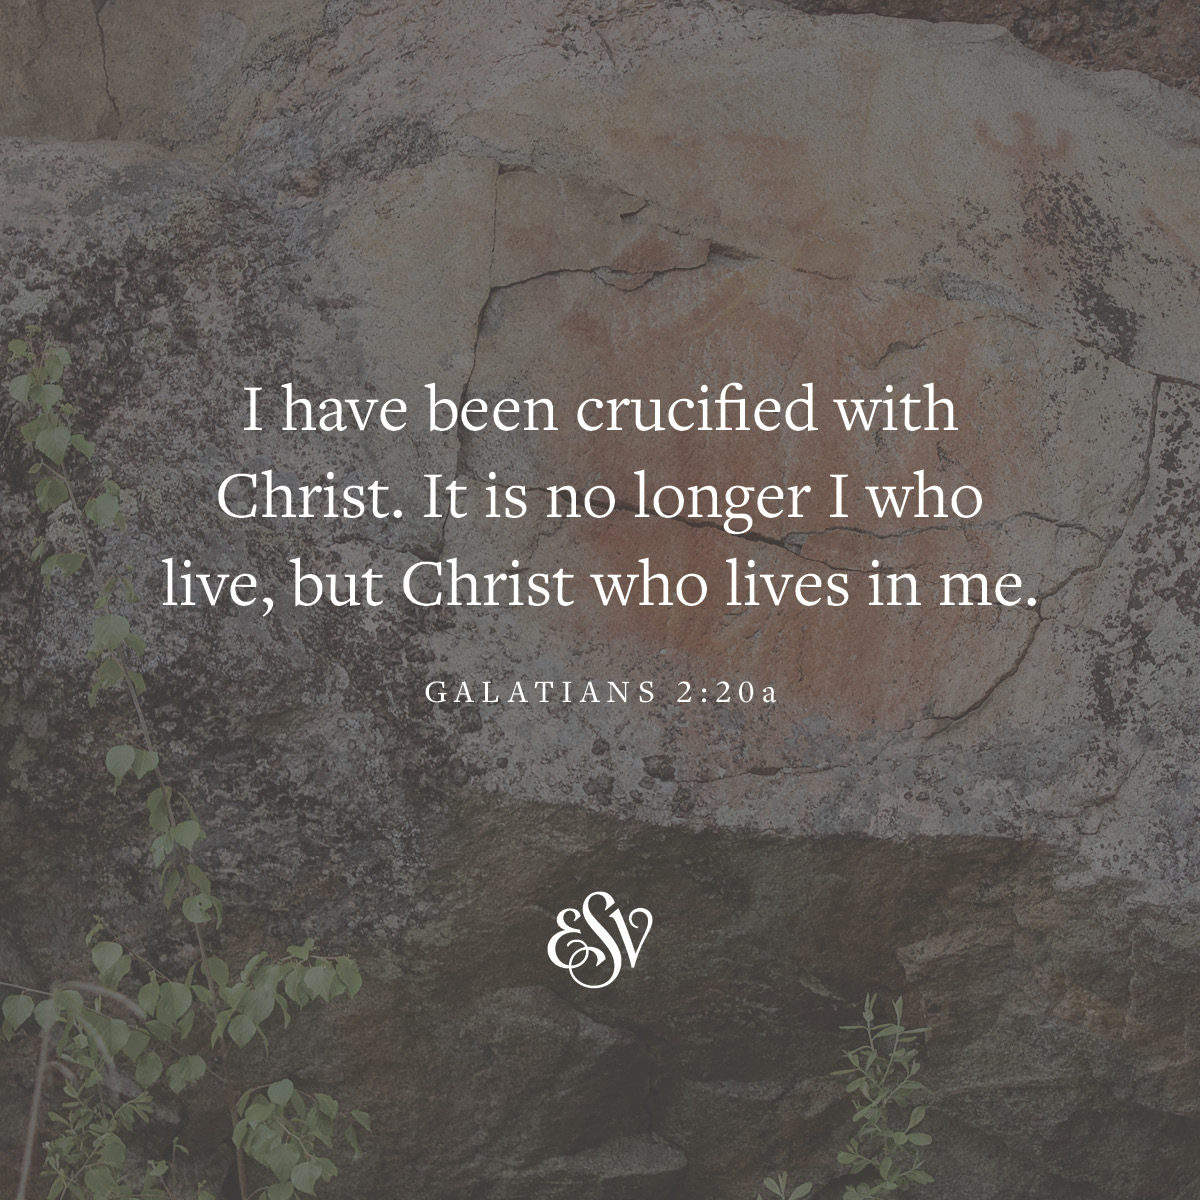 I have been crucified with Christ. It is no longer I who live, but Christ who lives in me. —Galatians 2:20a #Verseoftheday #ESV #Scripturememoryverse #Bible